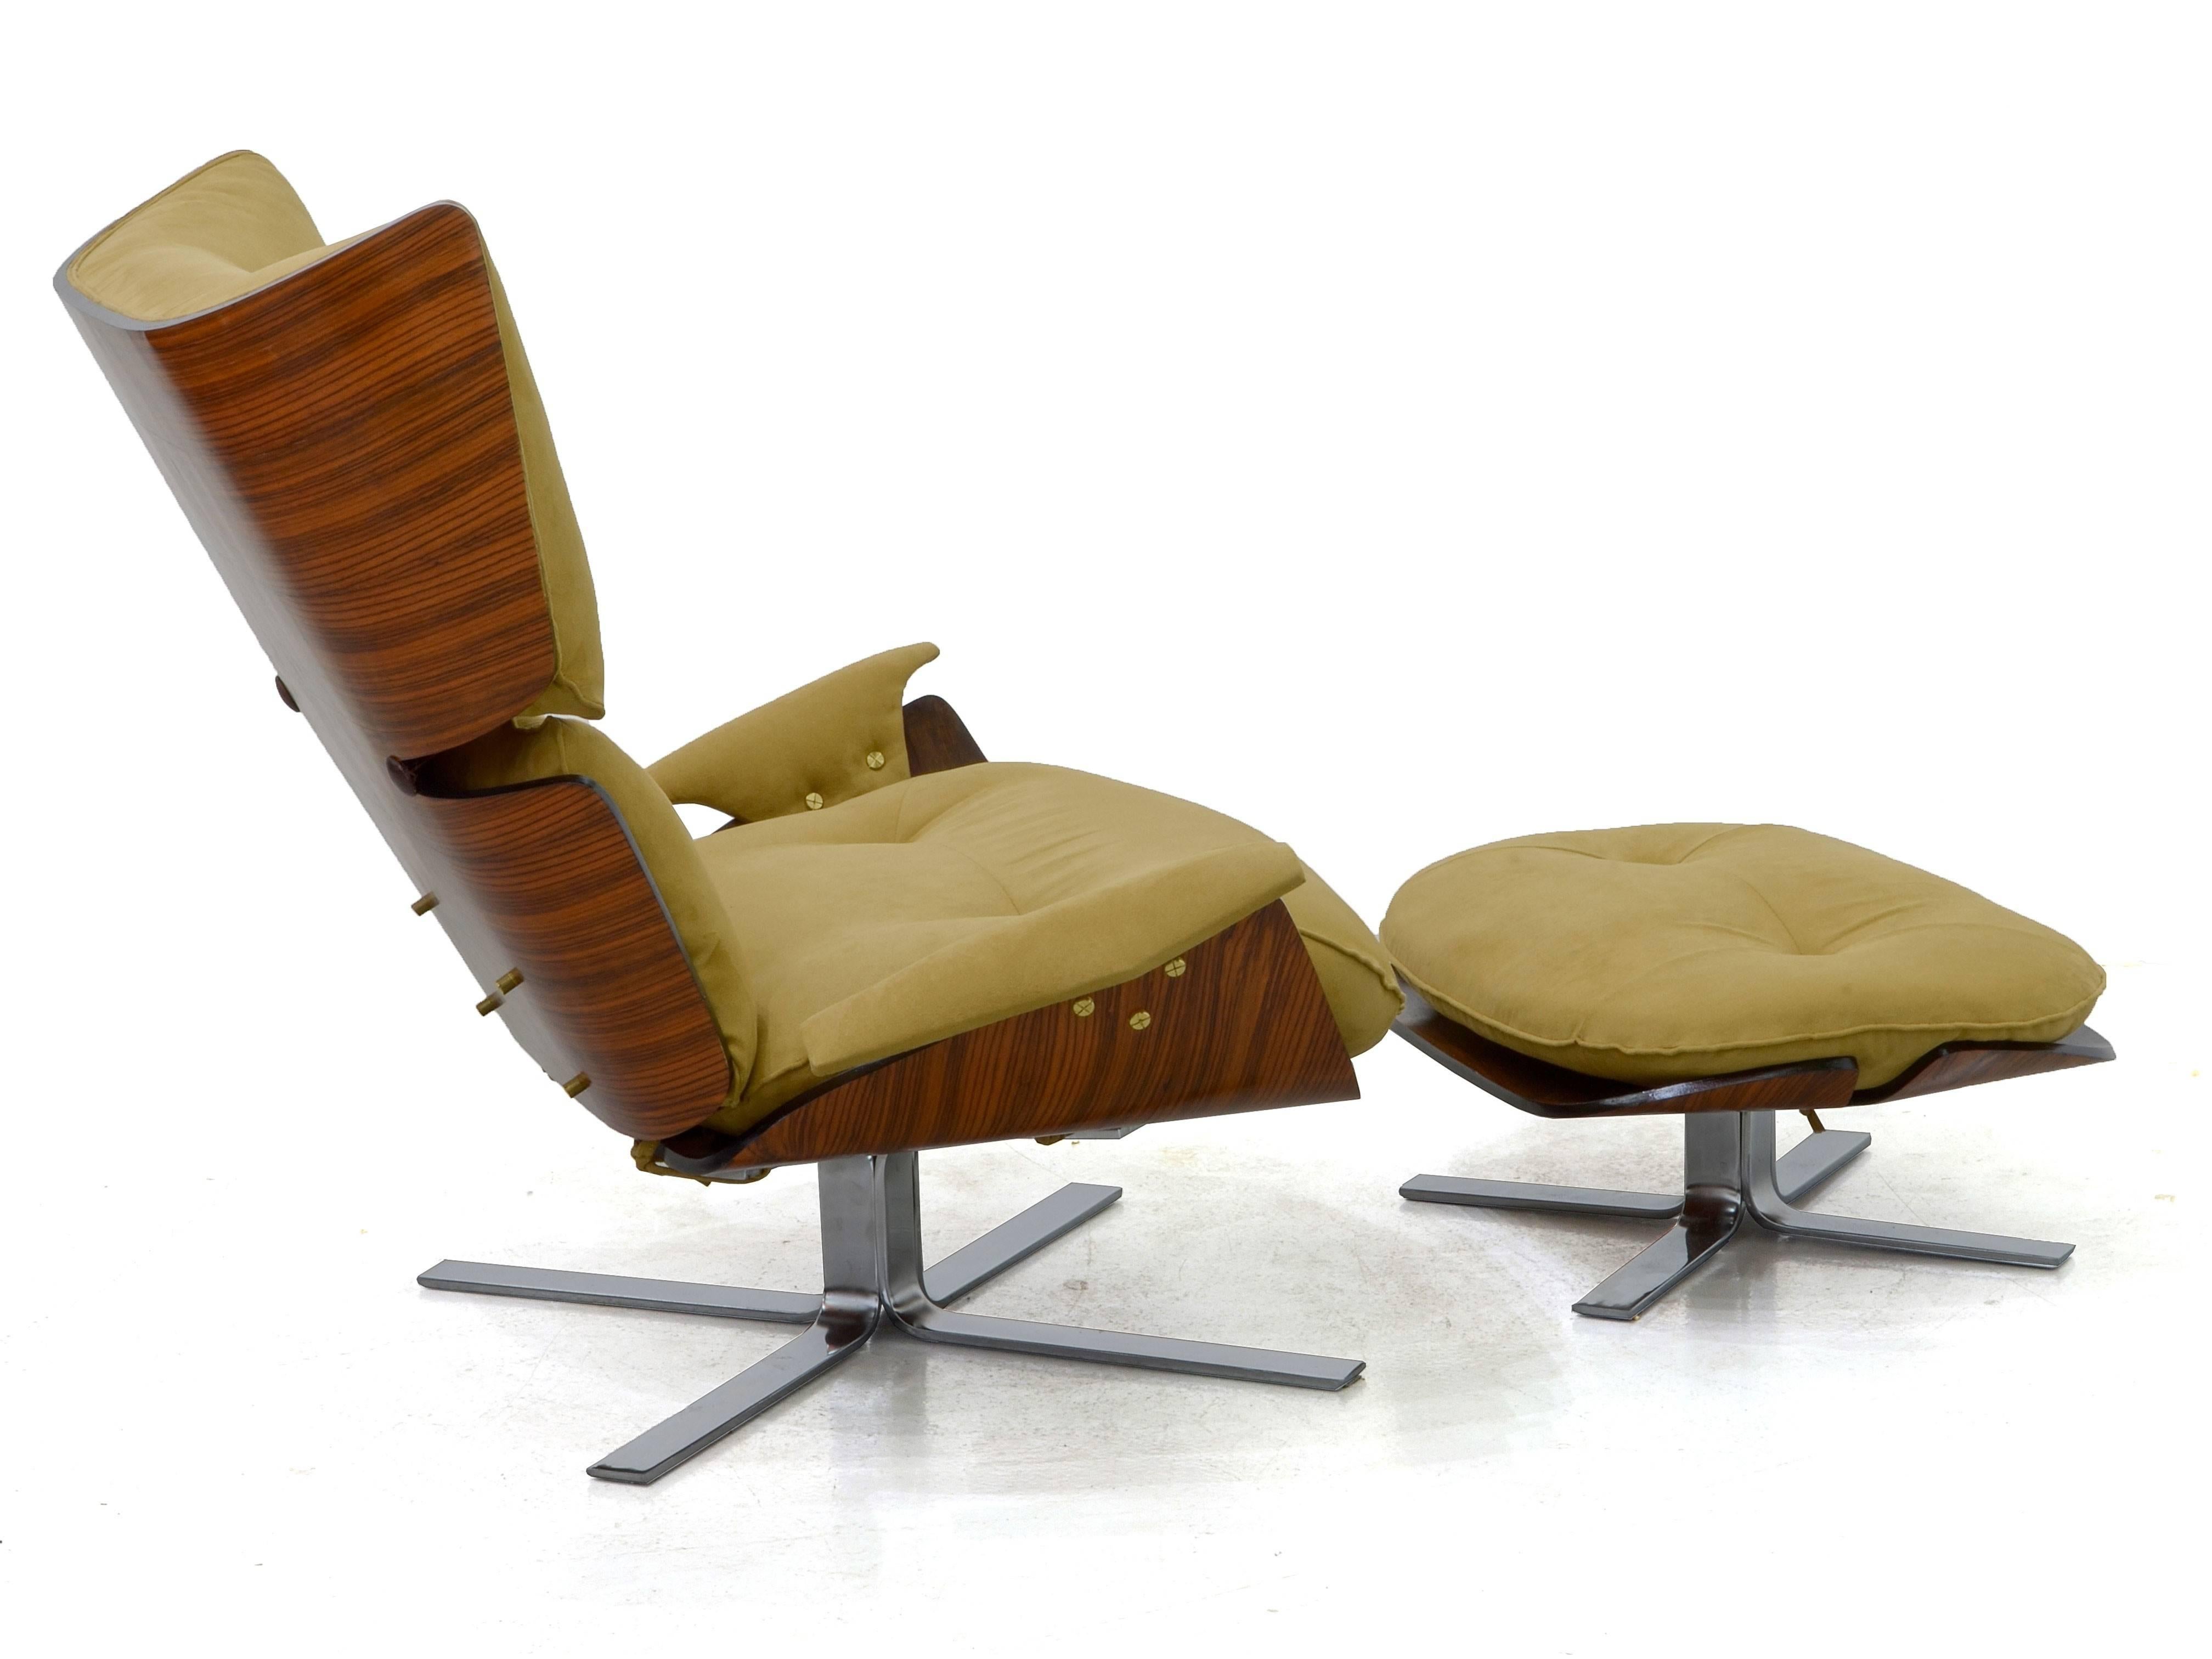 The Paulistana lounge chair, made in the midcentury style, is one of the most recognized pieces created by Jorge Zalszupin. Its structure is made of jacaranda rosewood and the piece has been recently reupholstered and restored.